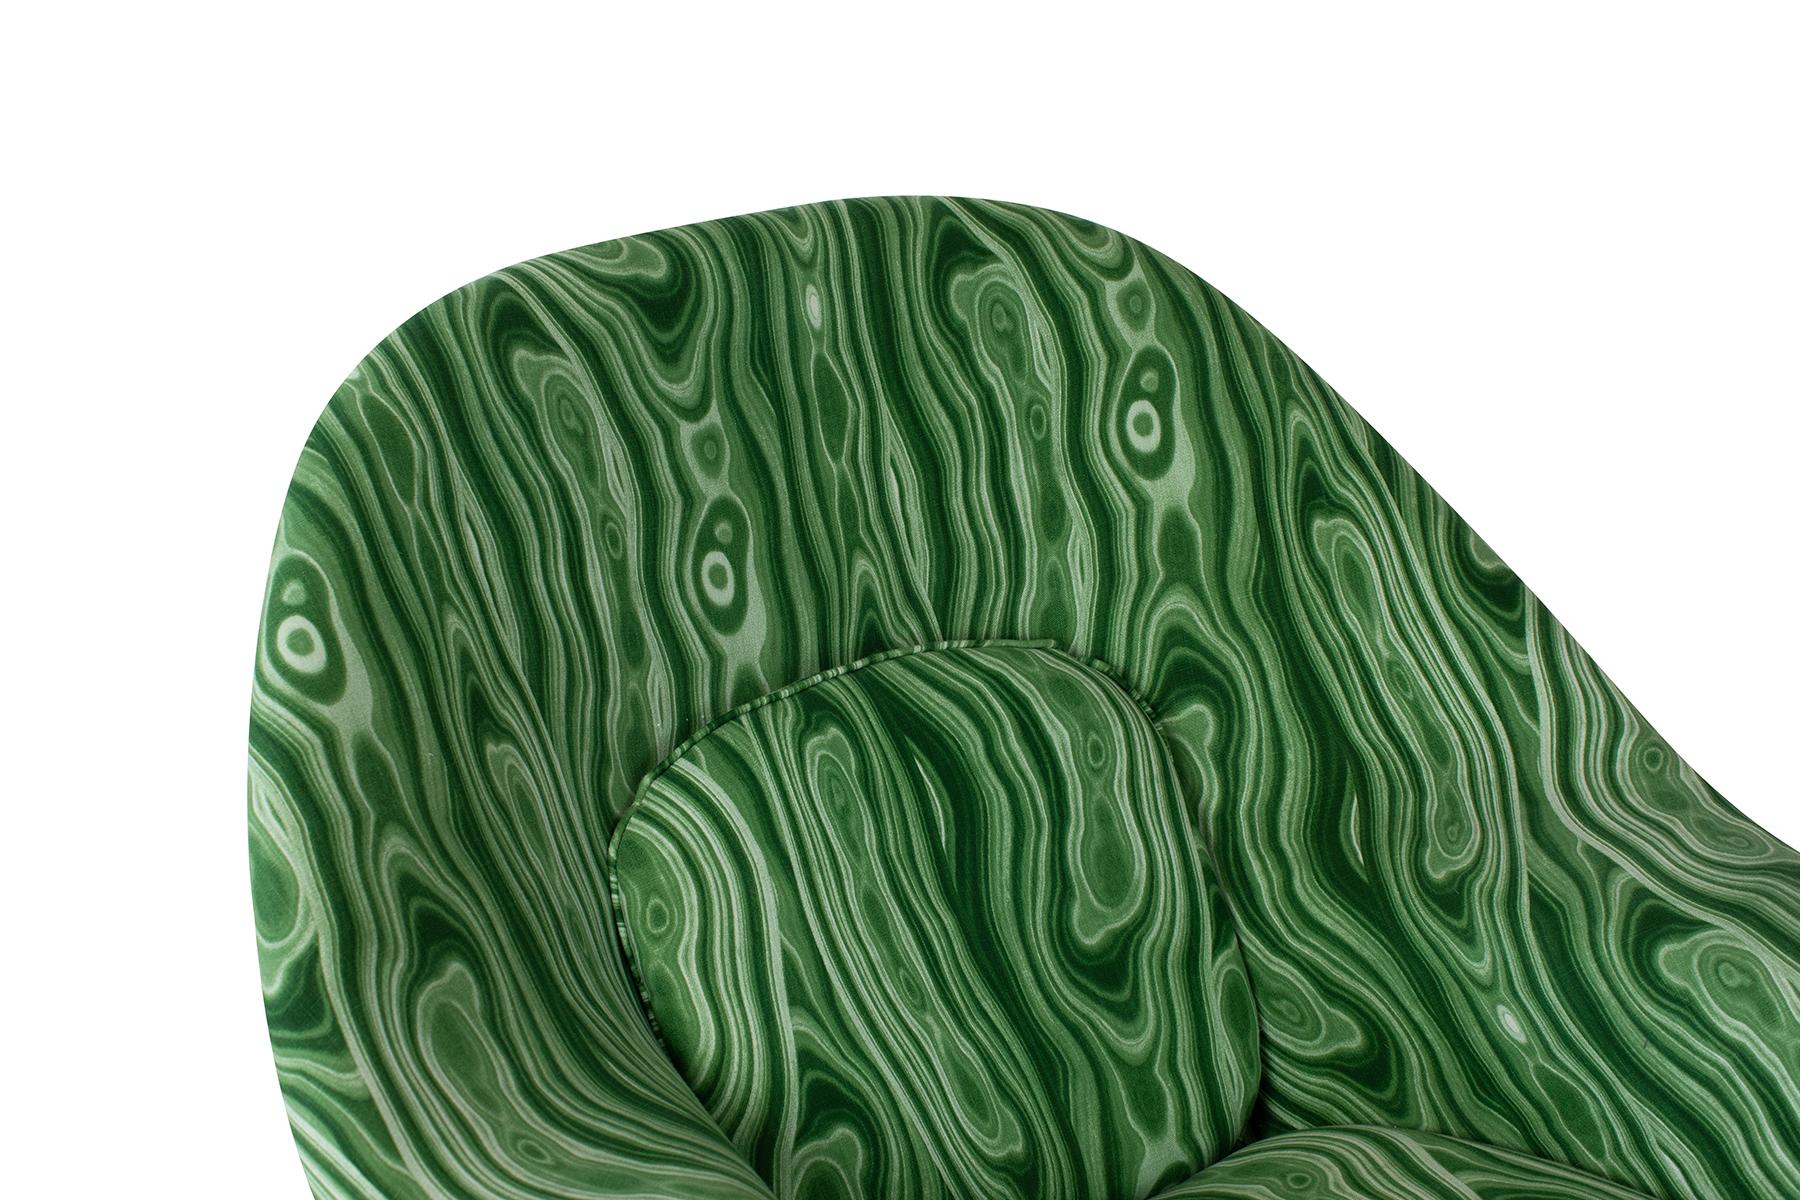 Womb chair and otttoman by Eero Saarinen for Knoll circa early 1970s. This example was upholstered recently in a fabulous malachite textile. Price listed is for the chair and ottoman. Ottoman measures: 22